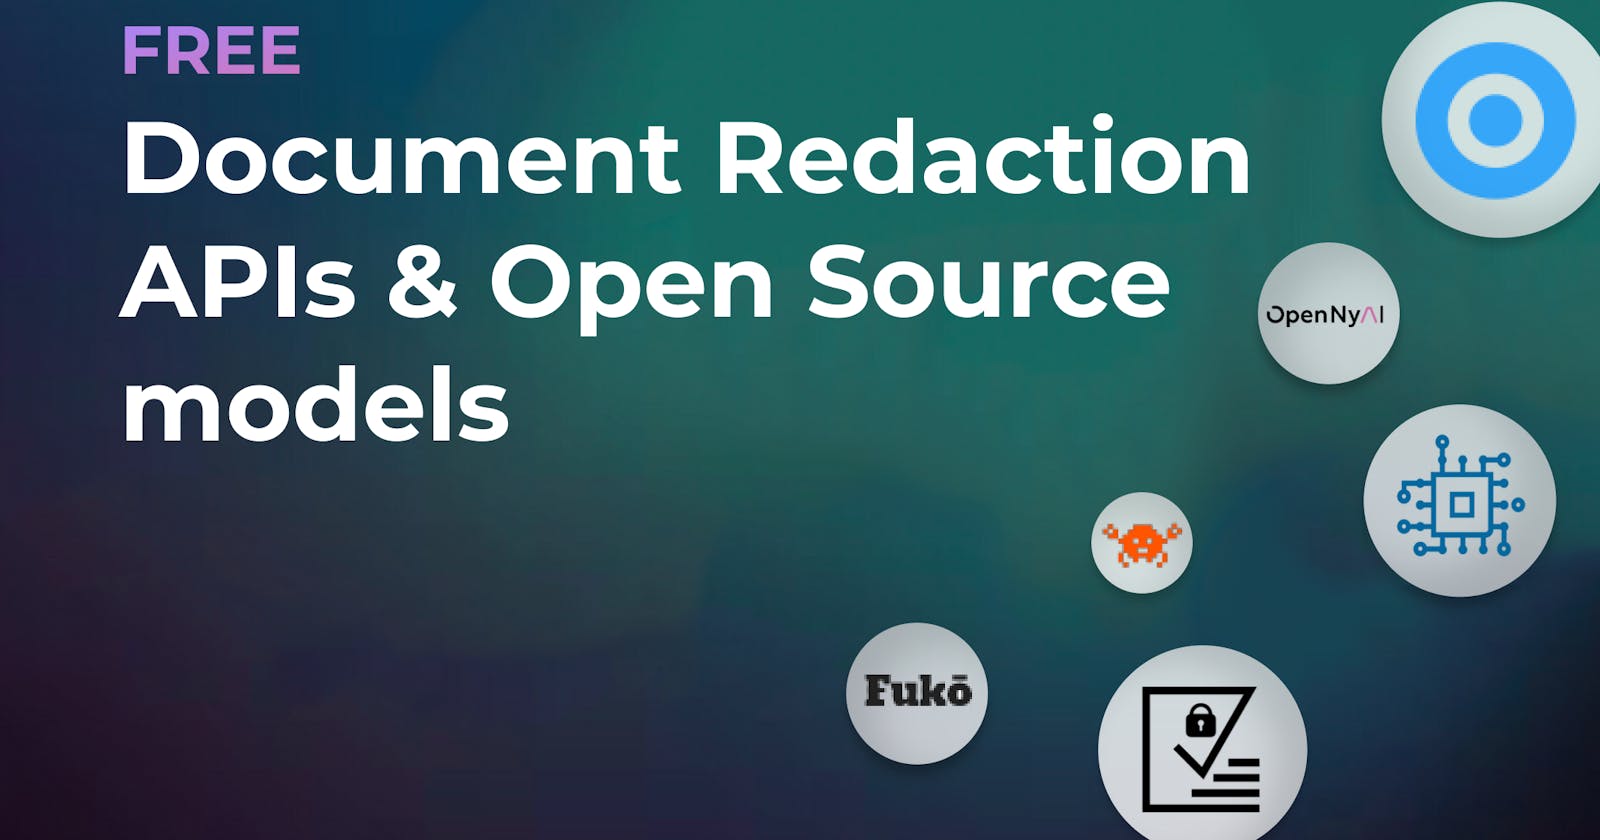 Top Free Document Redaction tools, APIs, and Open Source models